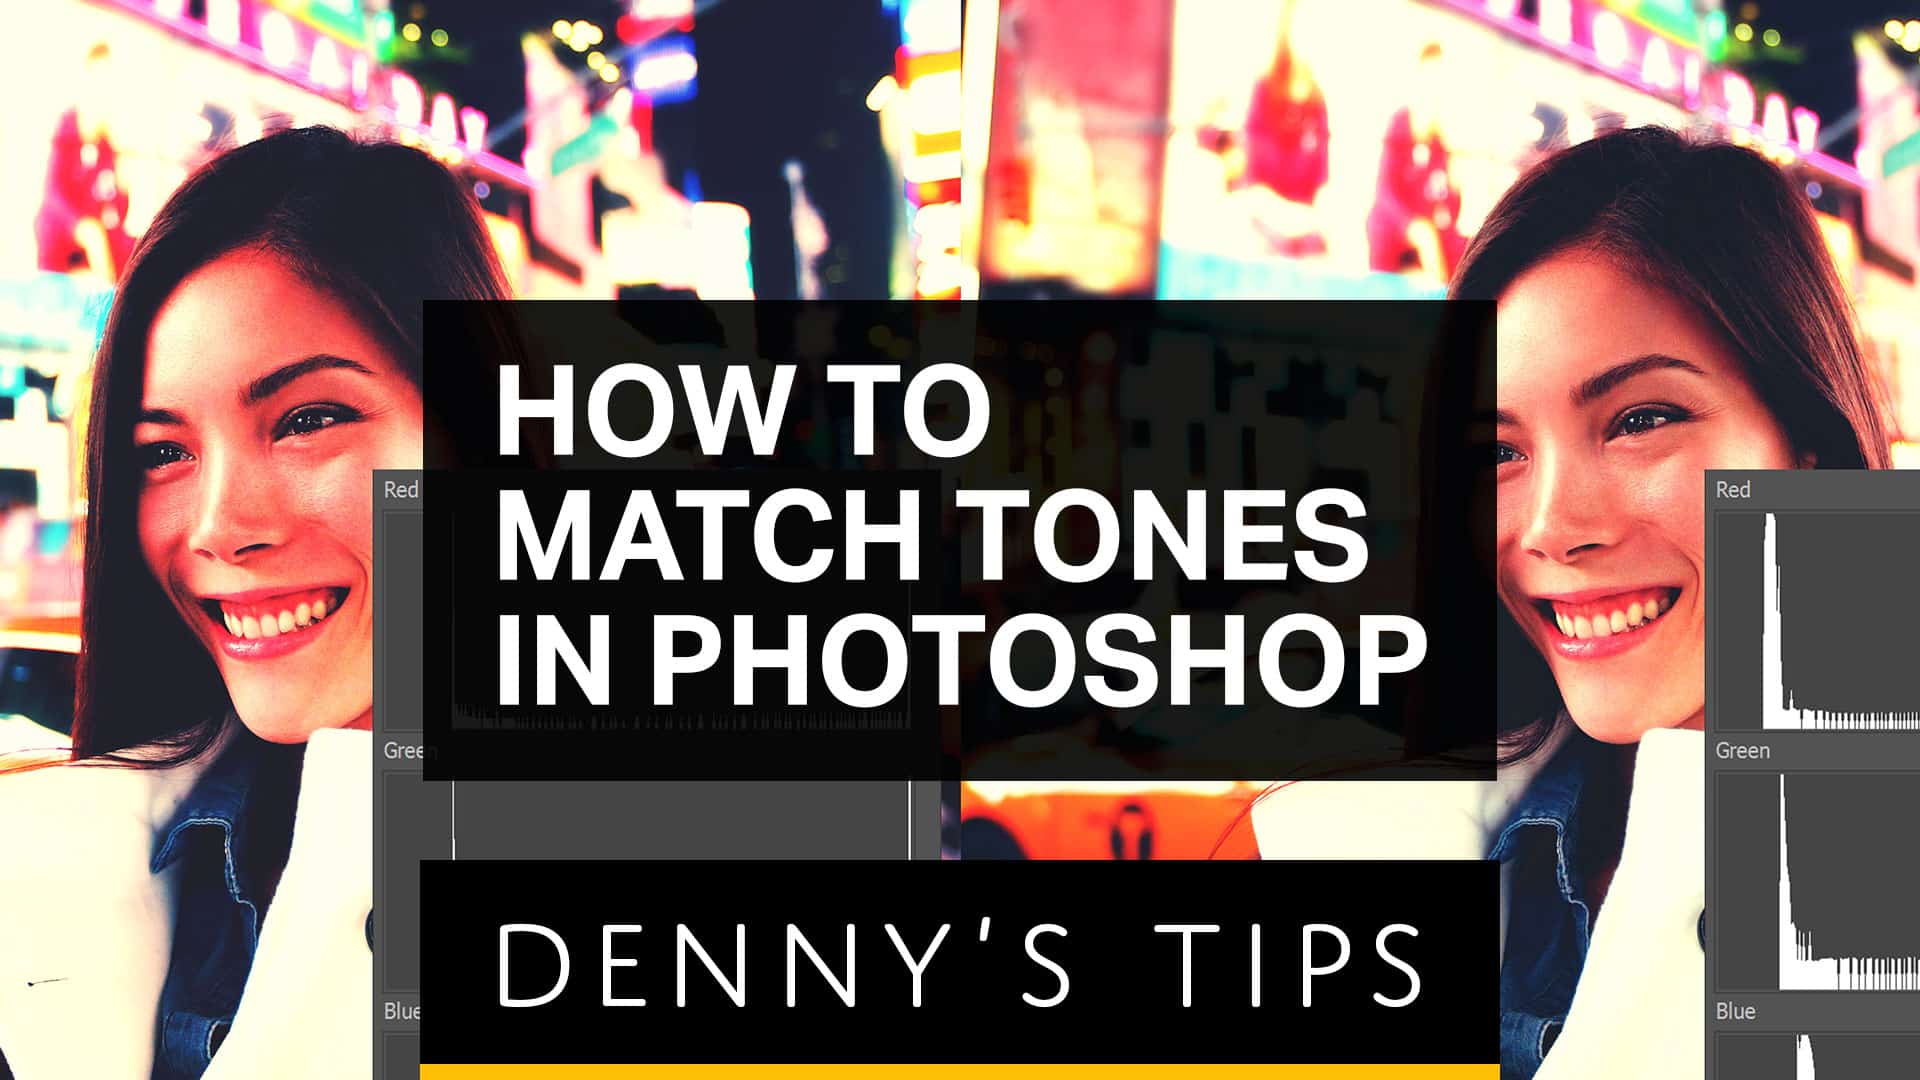 How to Match Tones in Photoshop